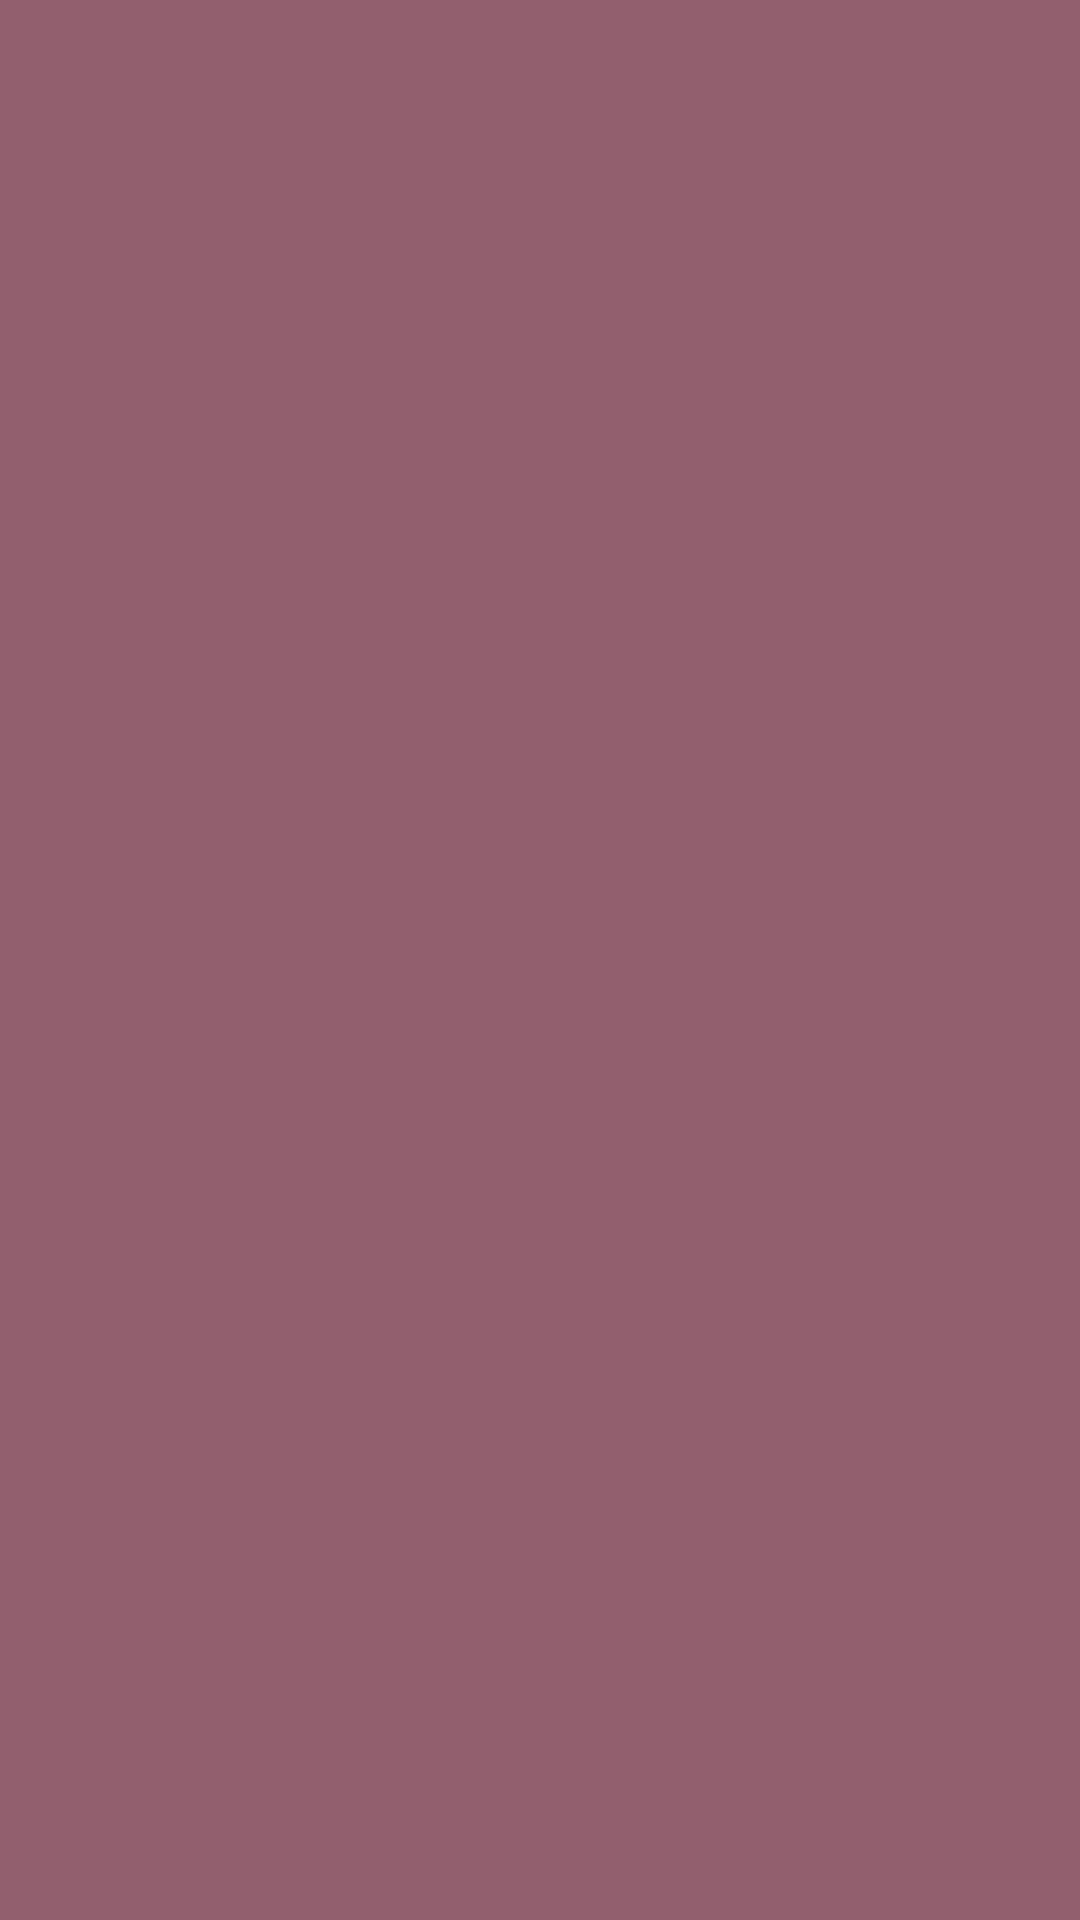 1080x1920 Mauve Taupe Solid Color Background